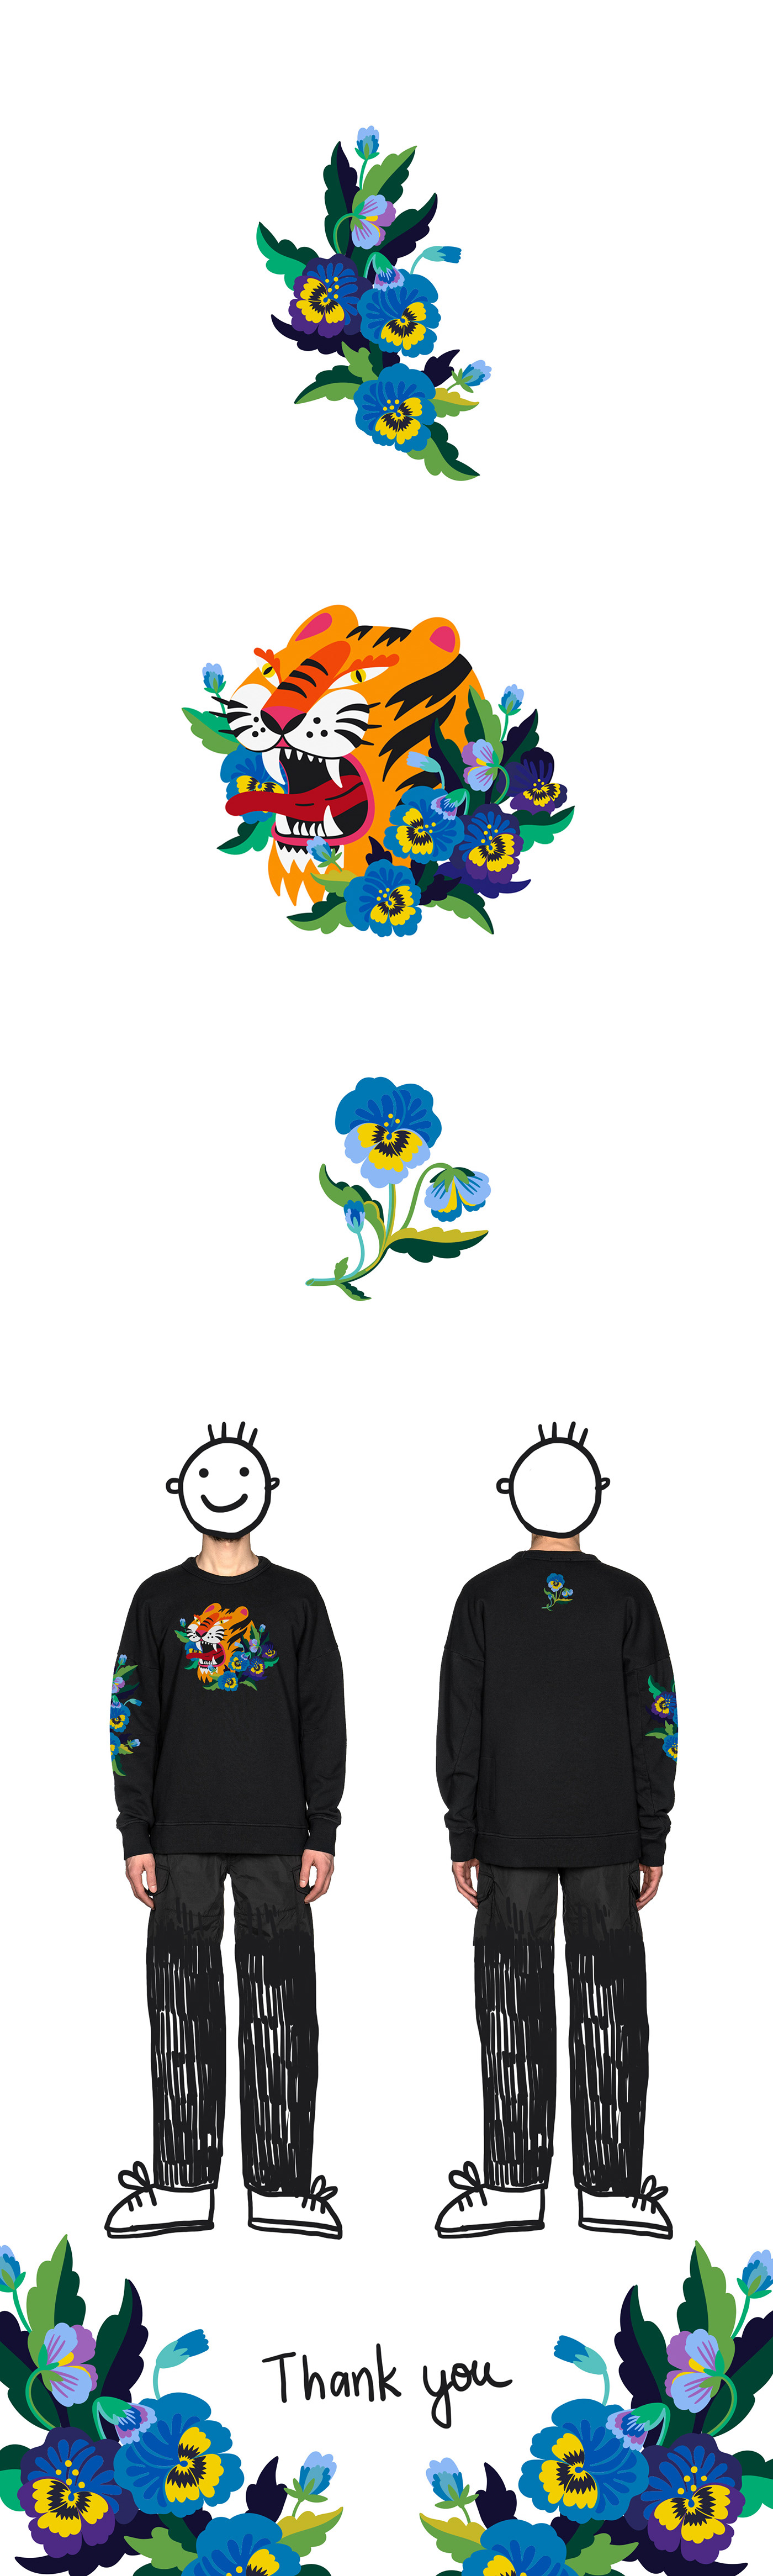 lithuania clothes embroidered tiger illustration Flower Illustration flower design animal illustration clothes illustration t shirt design clothes design